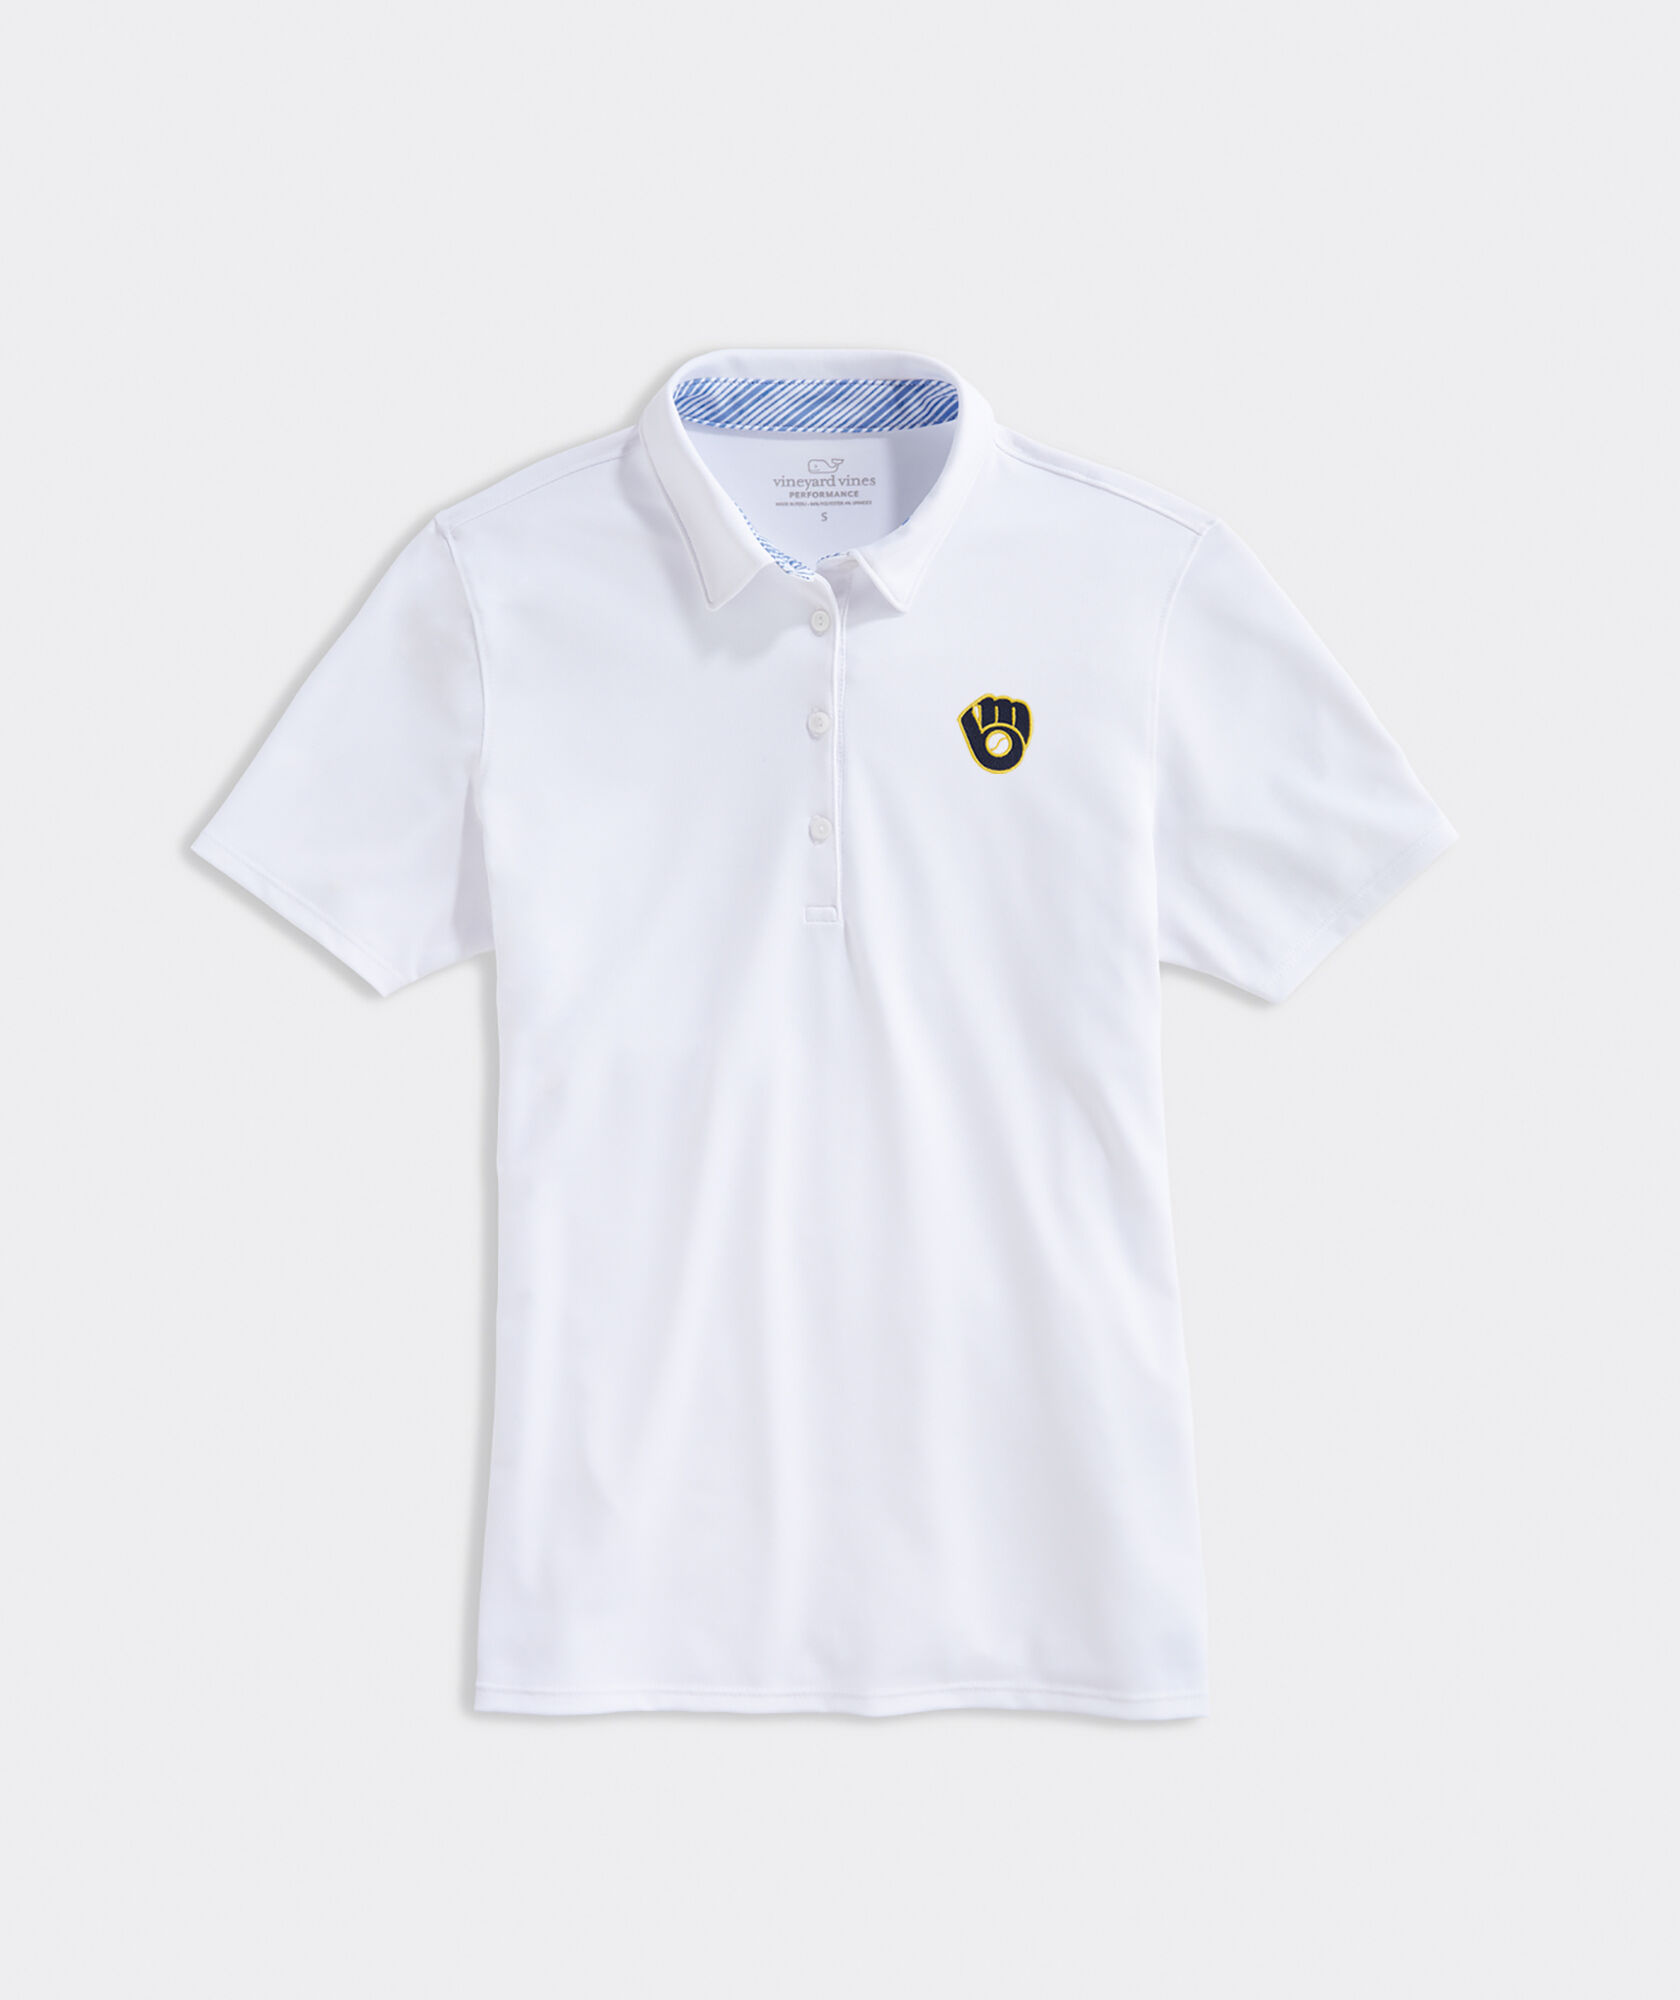 Women's Milwuakee Brewers Pique Polo